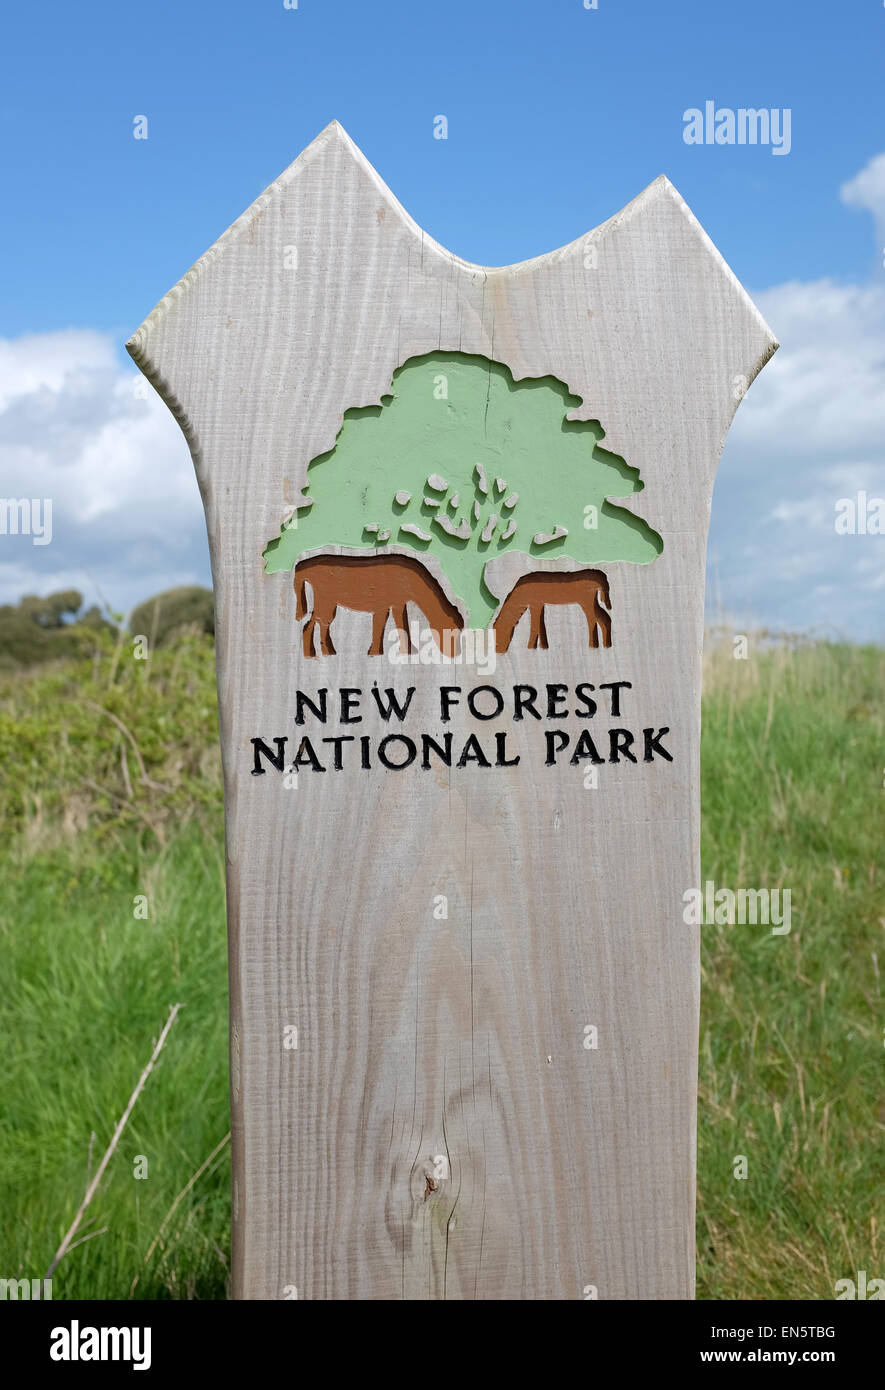 New Forest National Park sign against a blue cloudy sky Stock Photo